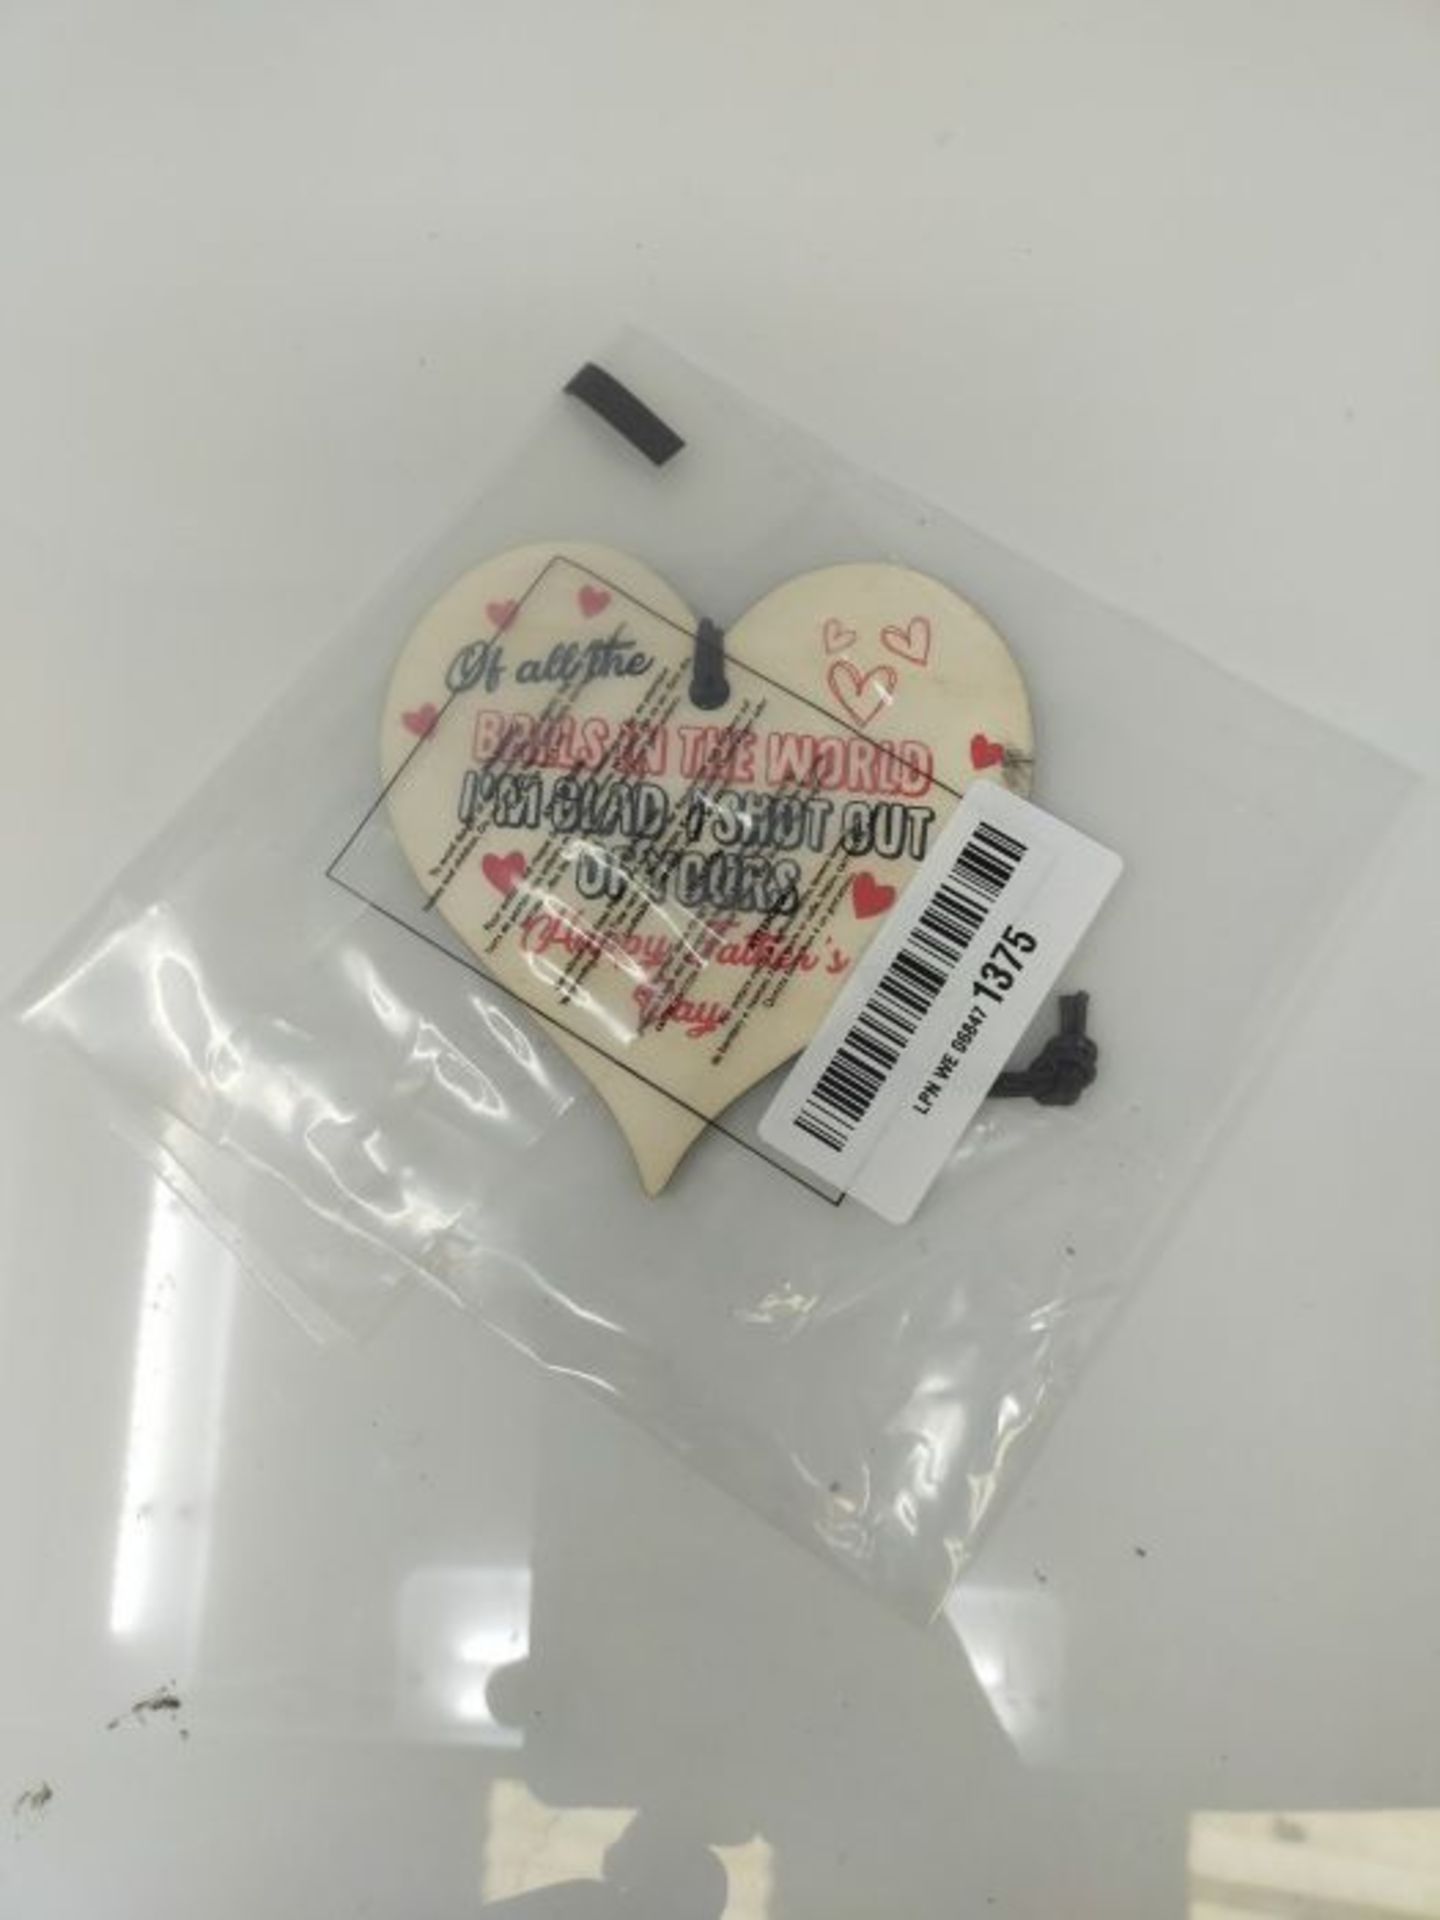 [INCOMPLETE] Funny Rude Fathers Day Novelty Wooden Heart Gift For Dad #1004 - Image 2 of 2